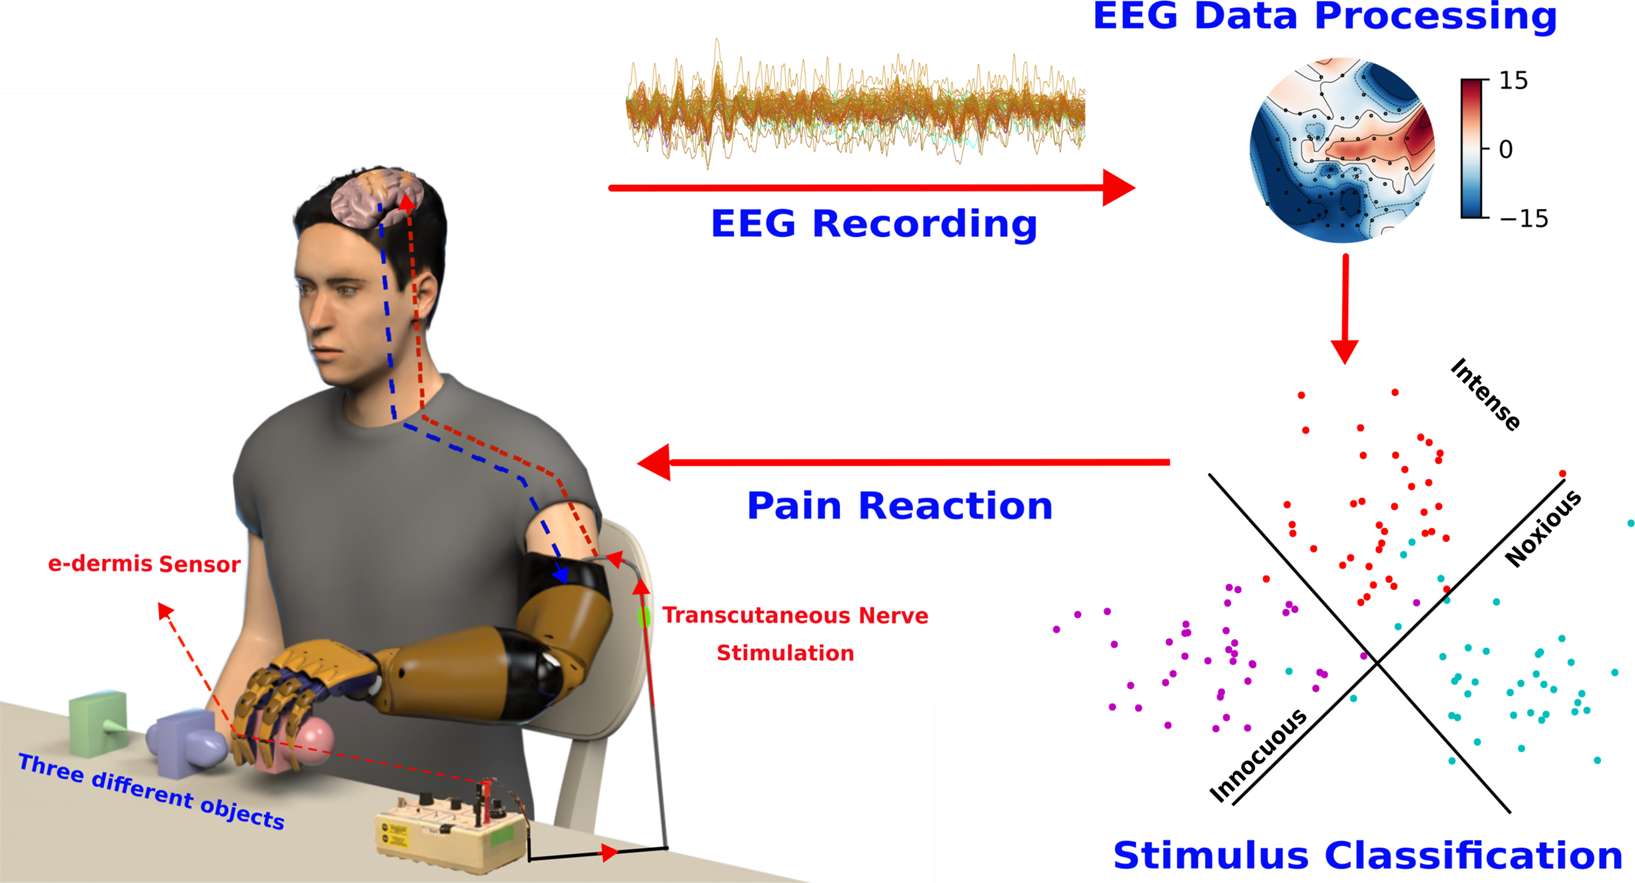 Decoding of Pain Perception using EEG Signals for a Real-Time Reflex System  in Prostheses: A Case Study | Scientific Reports